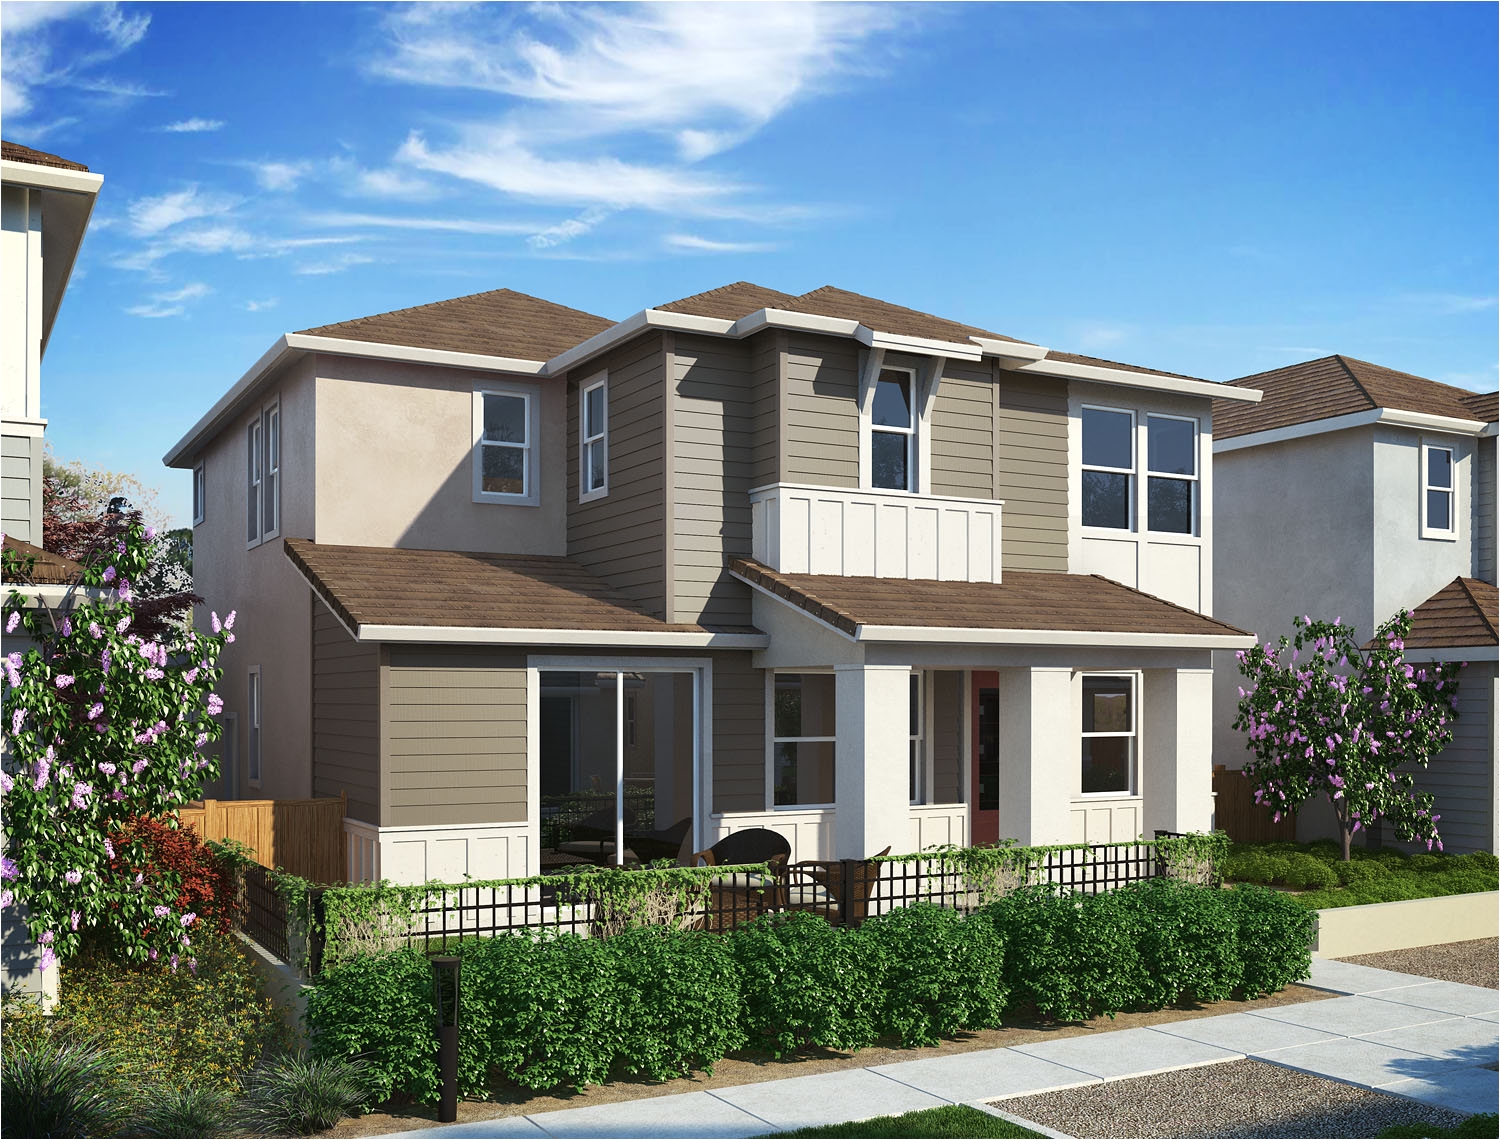 residence 1 plan rocklin california 95677 residence 1 plan at cresleigh rocklin trails by cresleigh homes